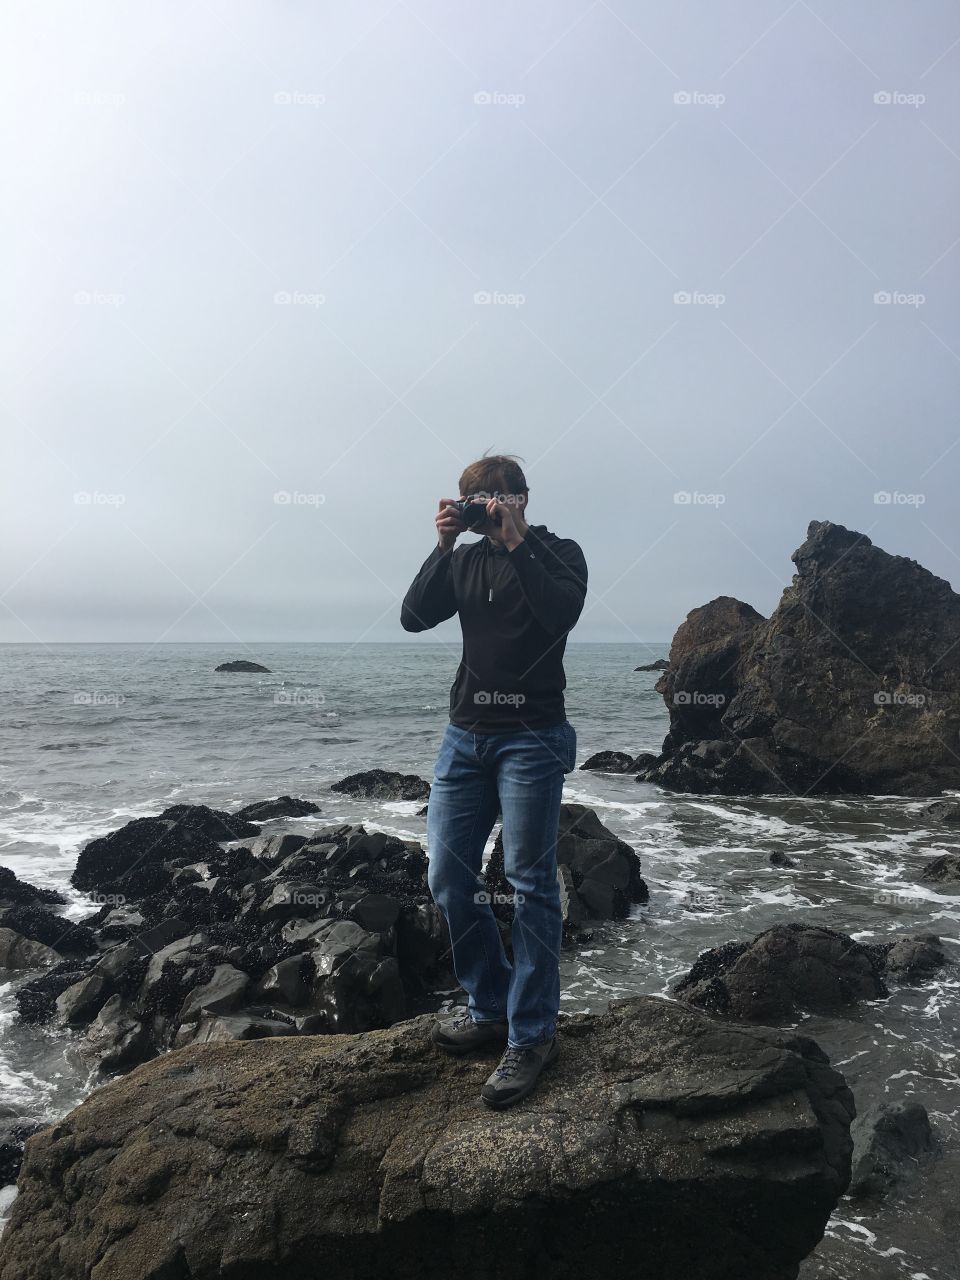 A picture that I took of my boyfriend (who was taking a picture of me) while exploring one of the many beautiful seashore locations in California!